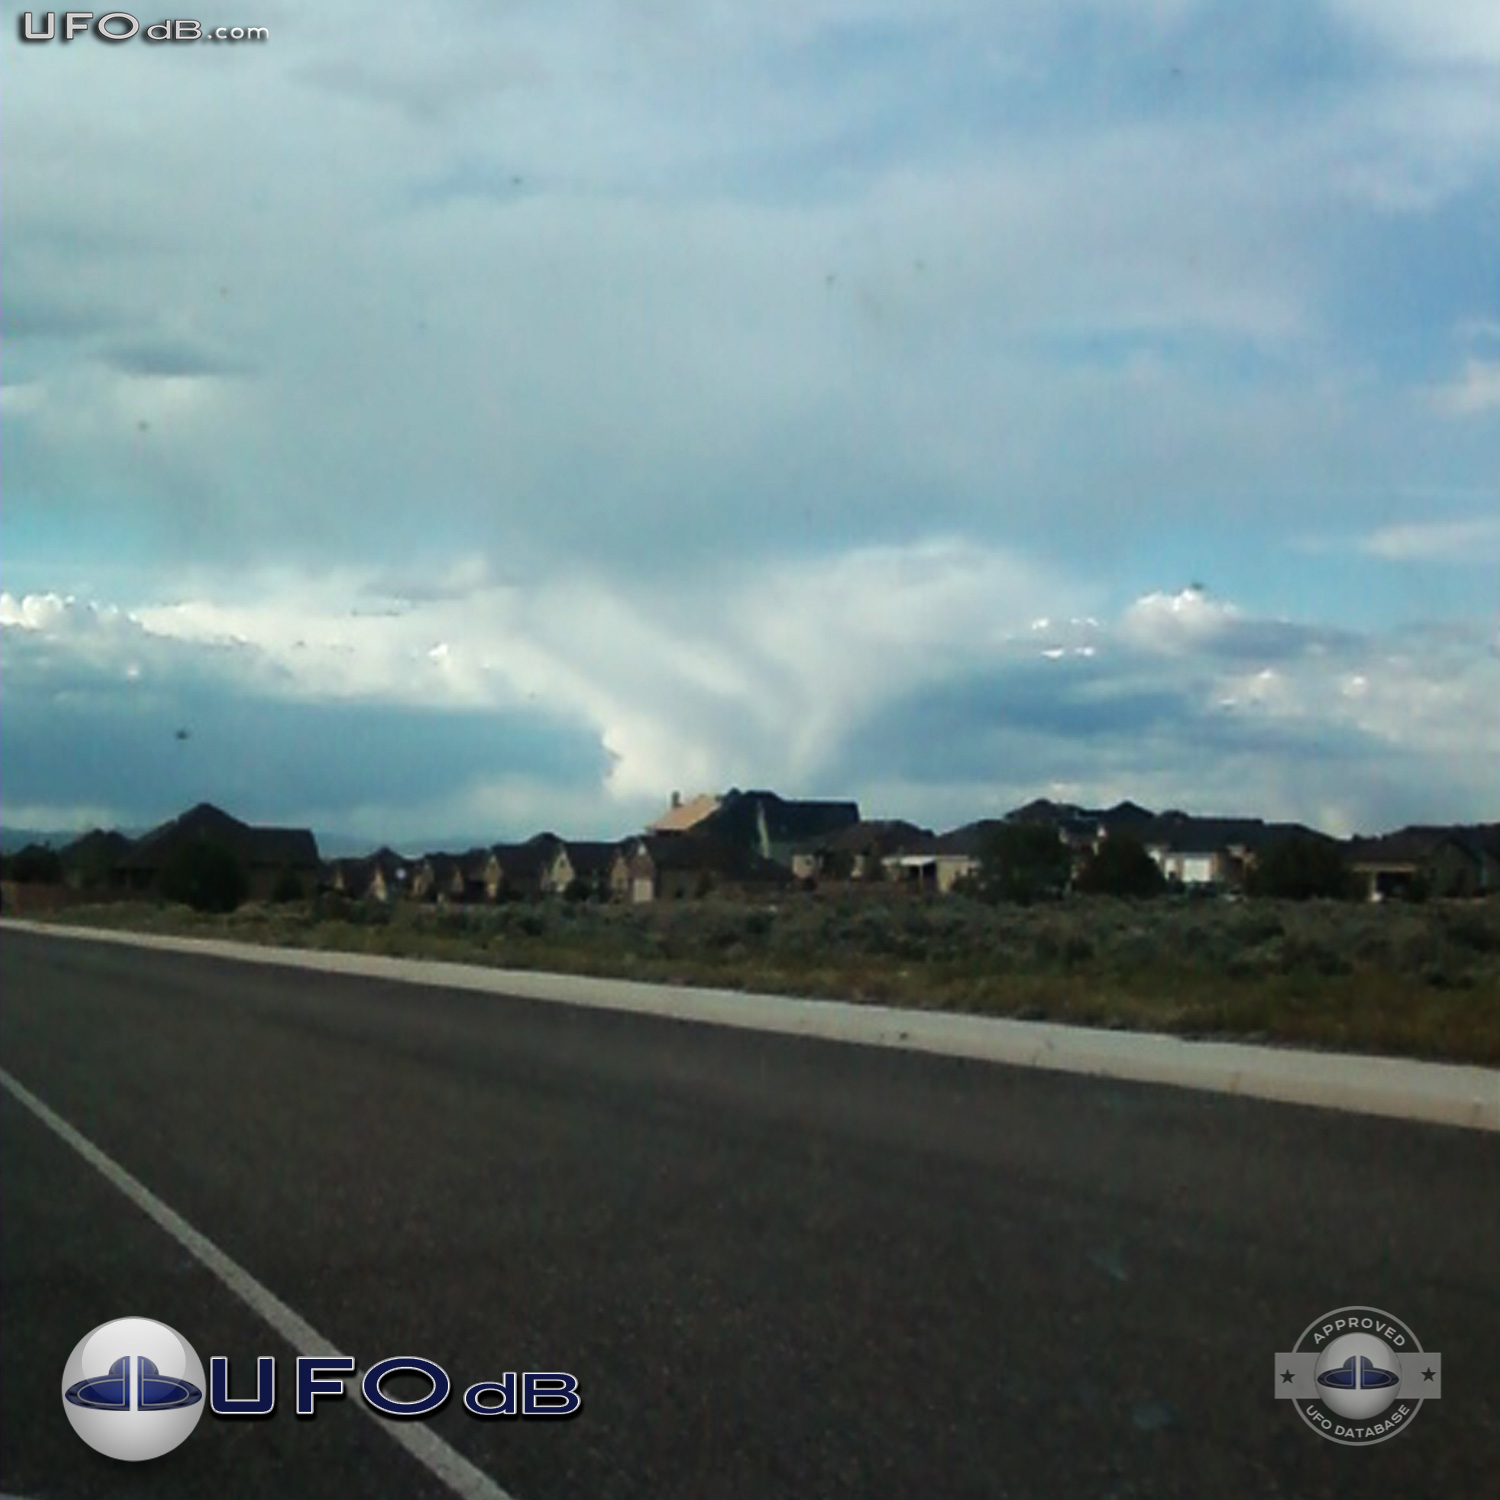 Group of UFOs hiding in the clouds in Cedar City, Utah | May 14 2011 UFO Picture #303-1